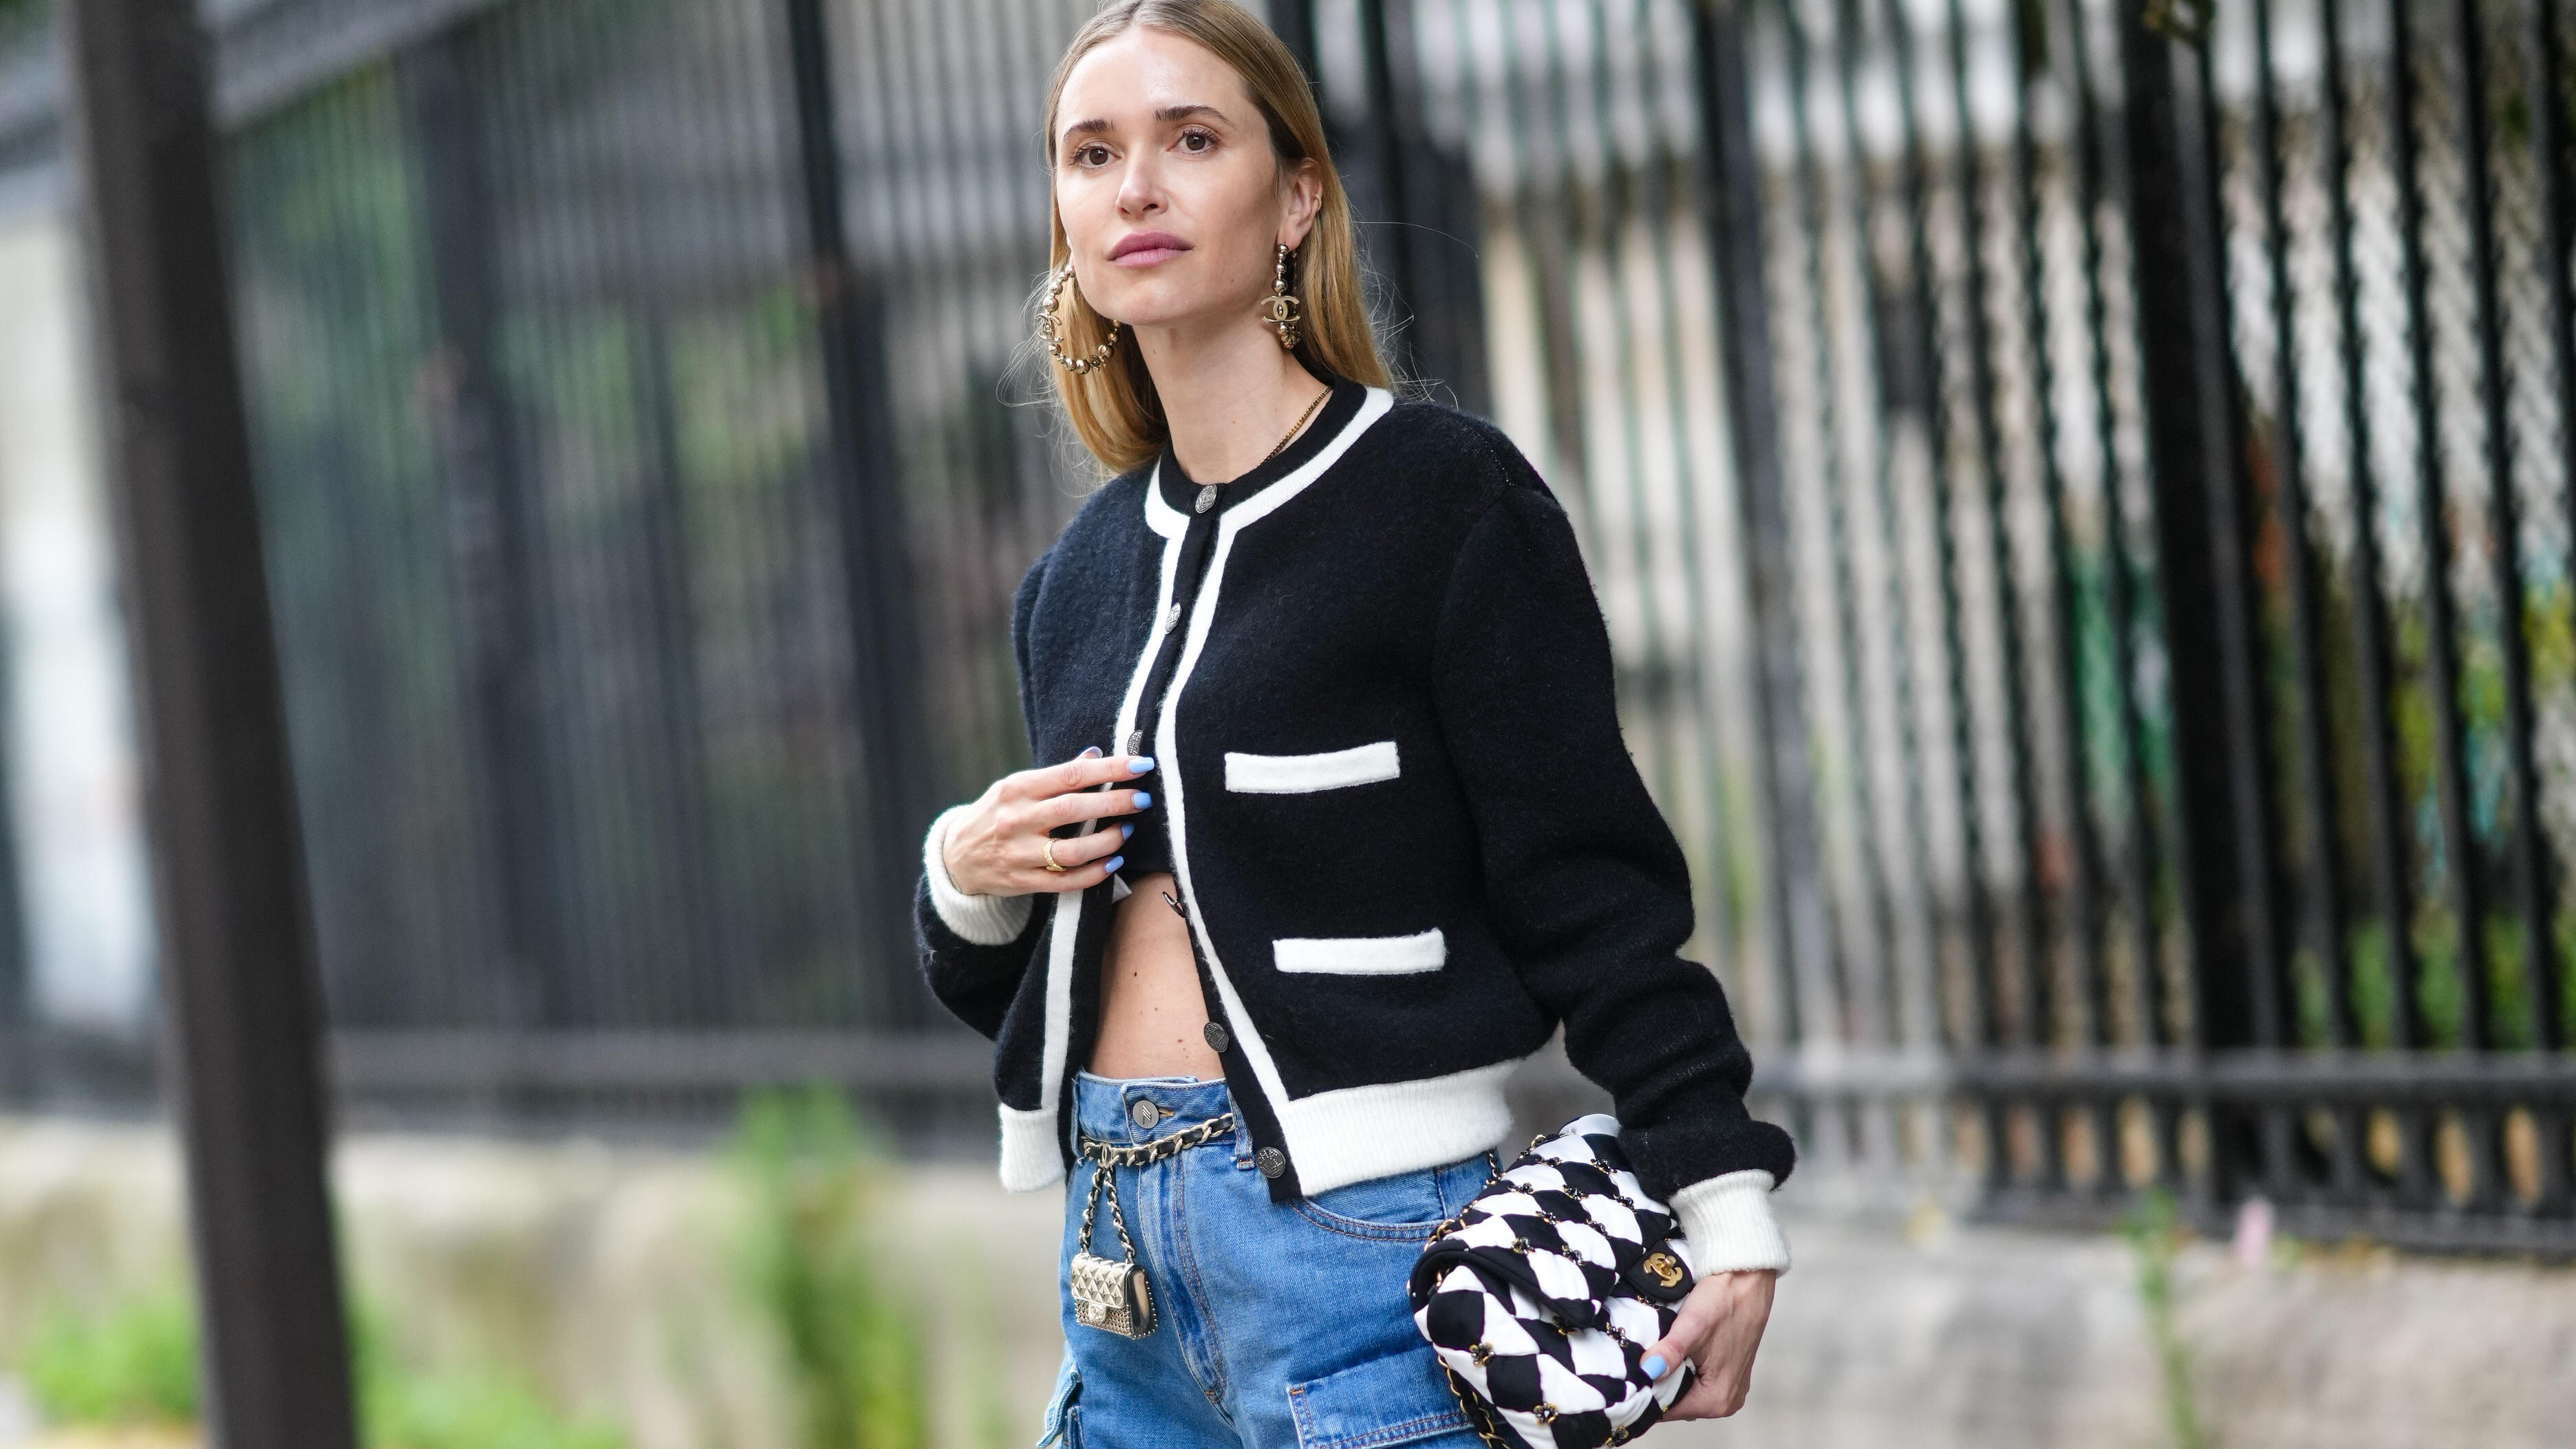 All The Best Street Style From Chanel's Haute Couture Show